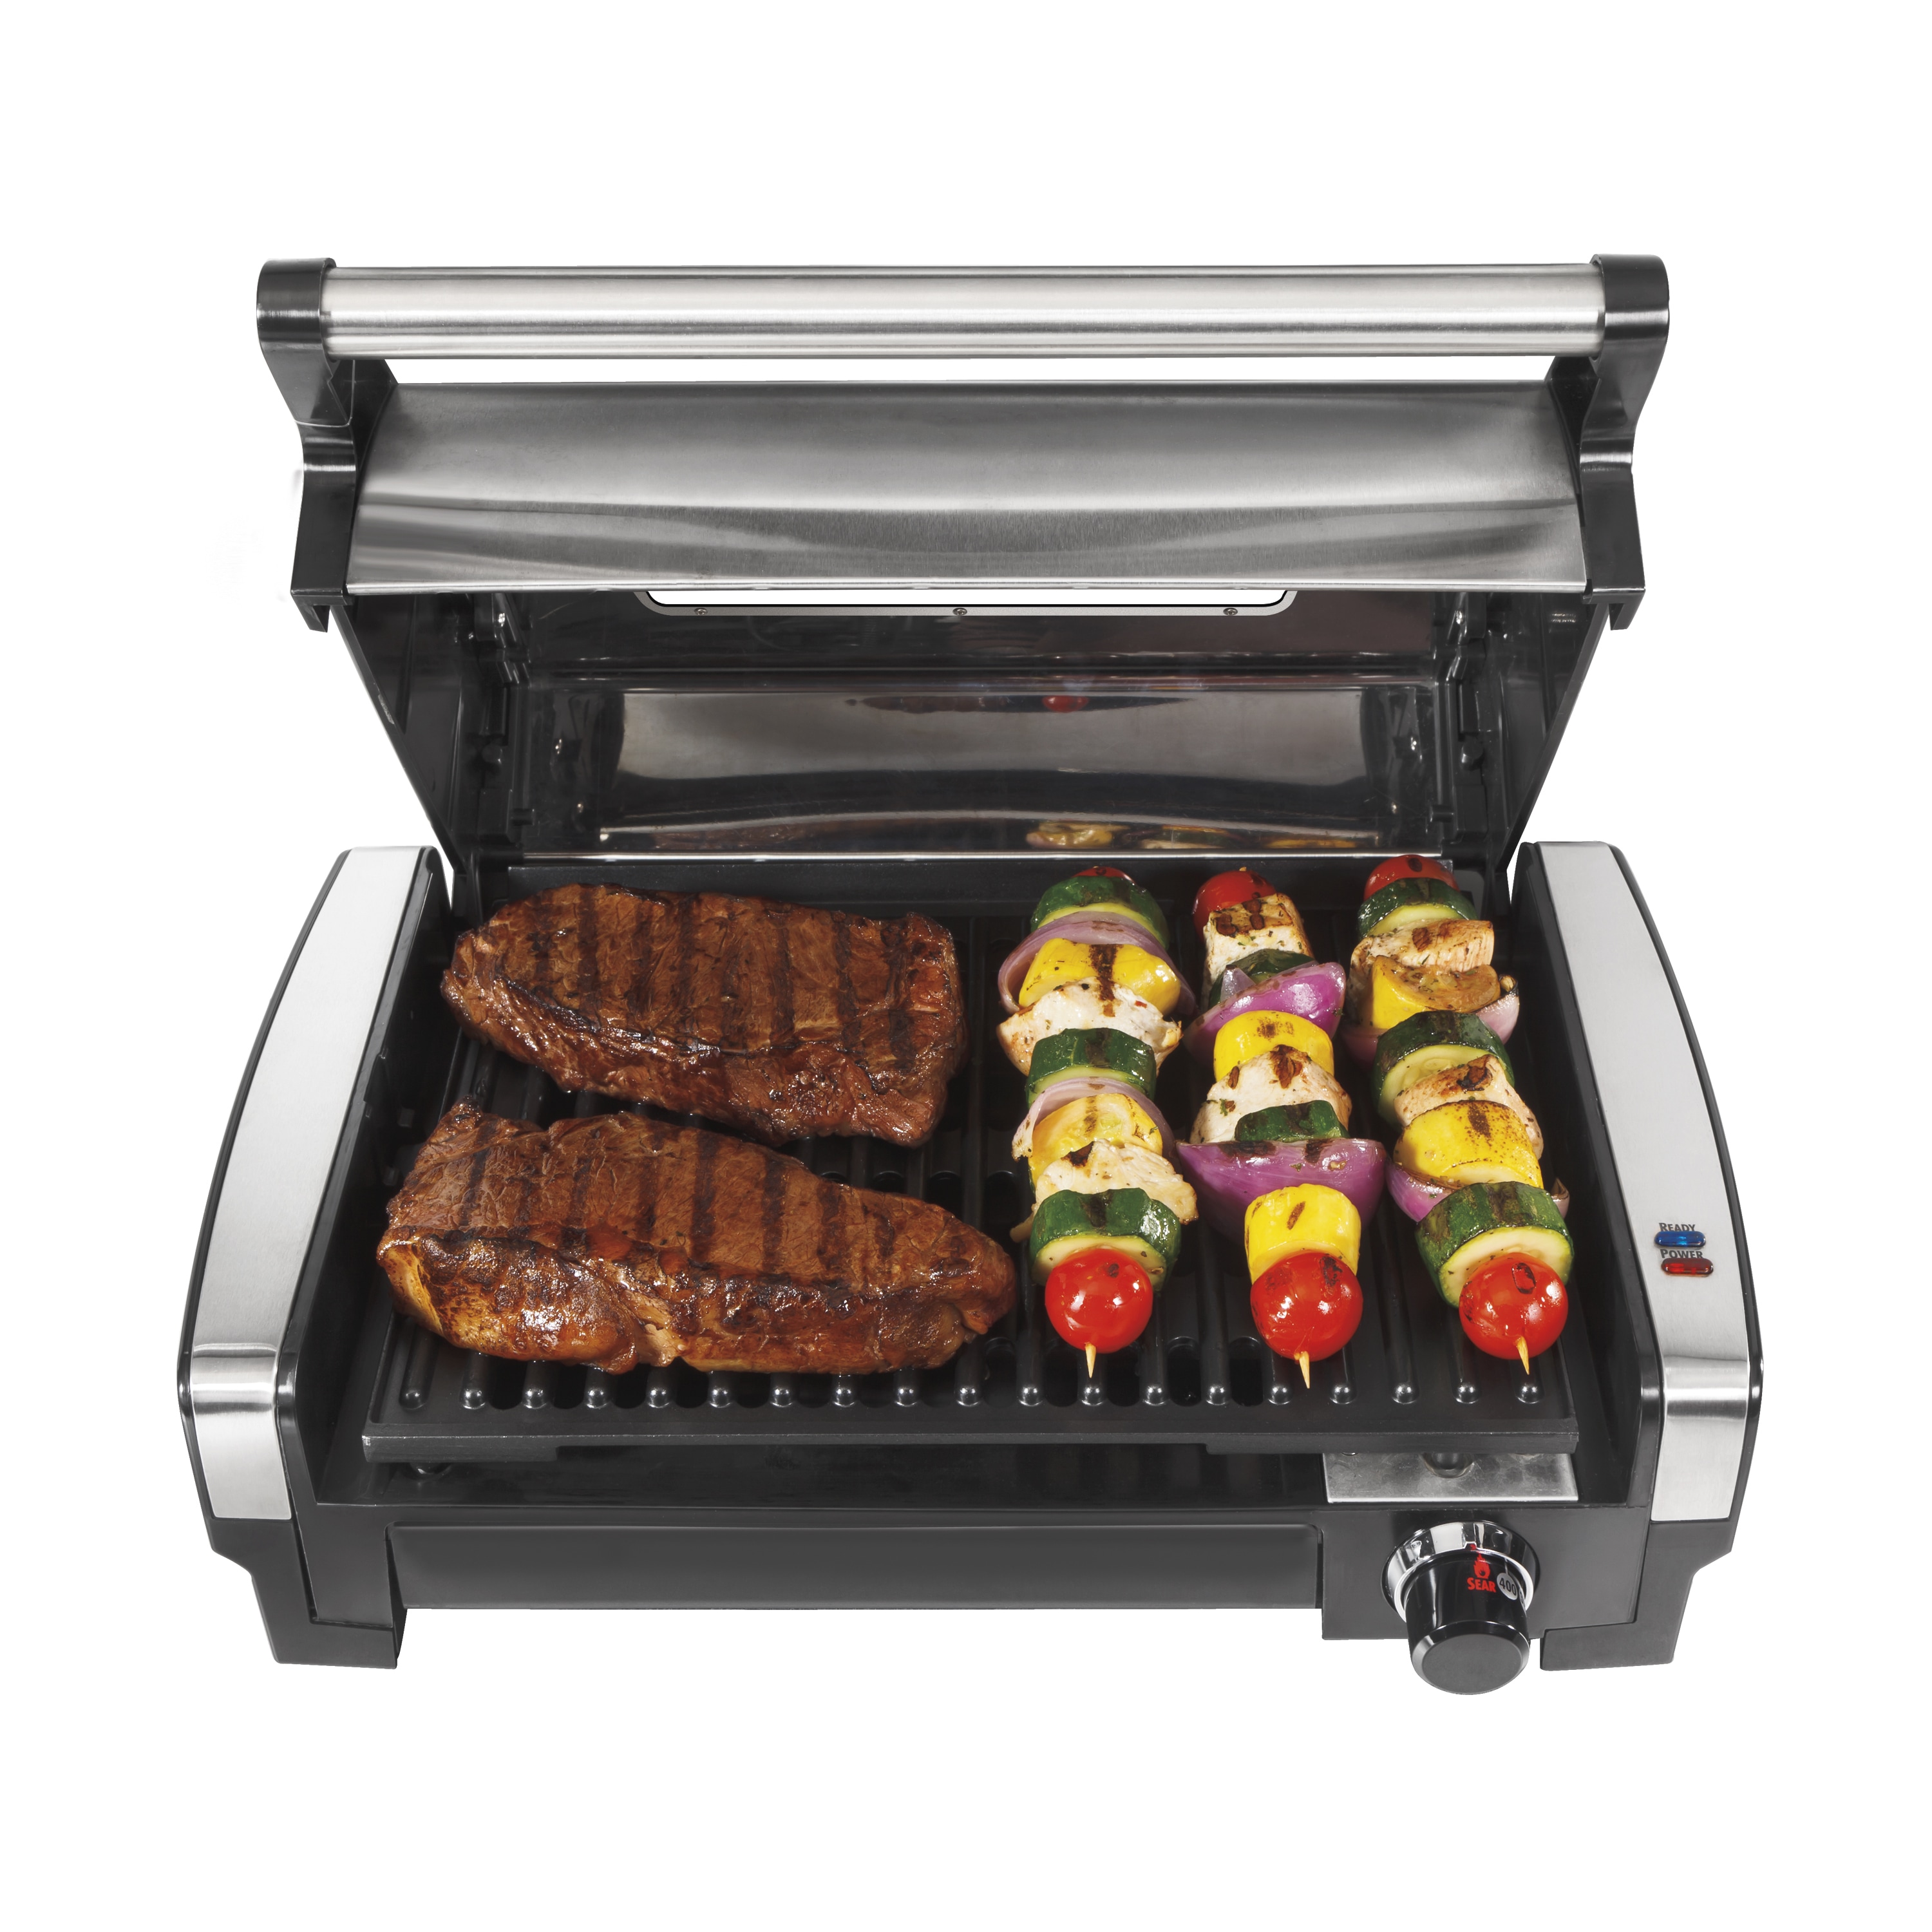 Hamilton Beach Electric Indoor Searing Grill with Viewing Window, Removable Easy to Clean Nonstick Plate, 6-Serving, Extra-Large Drip Tray, Stainless Steel, 25361 - image 2 of 5